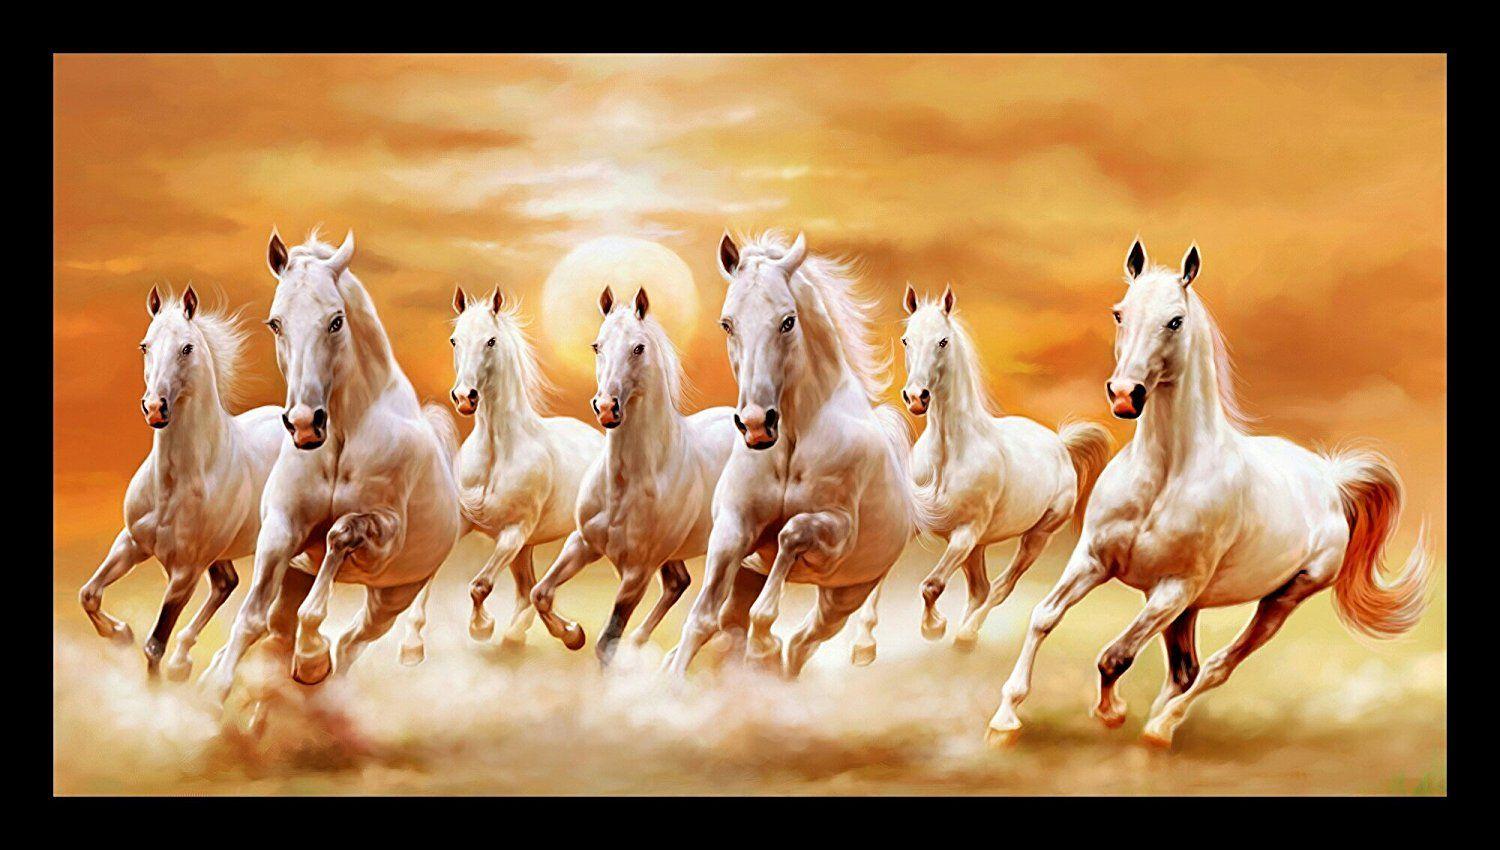 Décor  Design 3d Wallpaper Seven Horses Running For HomeOfficeDrawing  Room Digital Reprint 14 inch x 11 inch Painting Price in India  Buy Décor   Design 3d Wallpaper Seven Horses Running